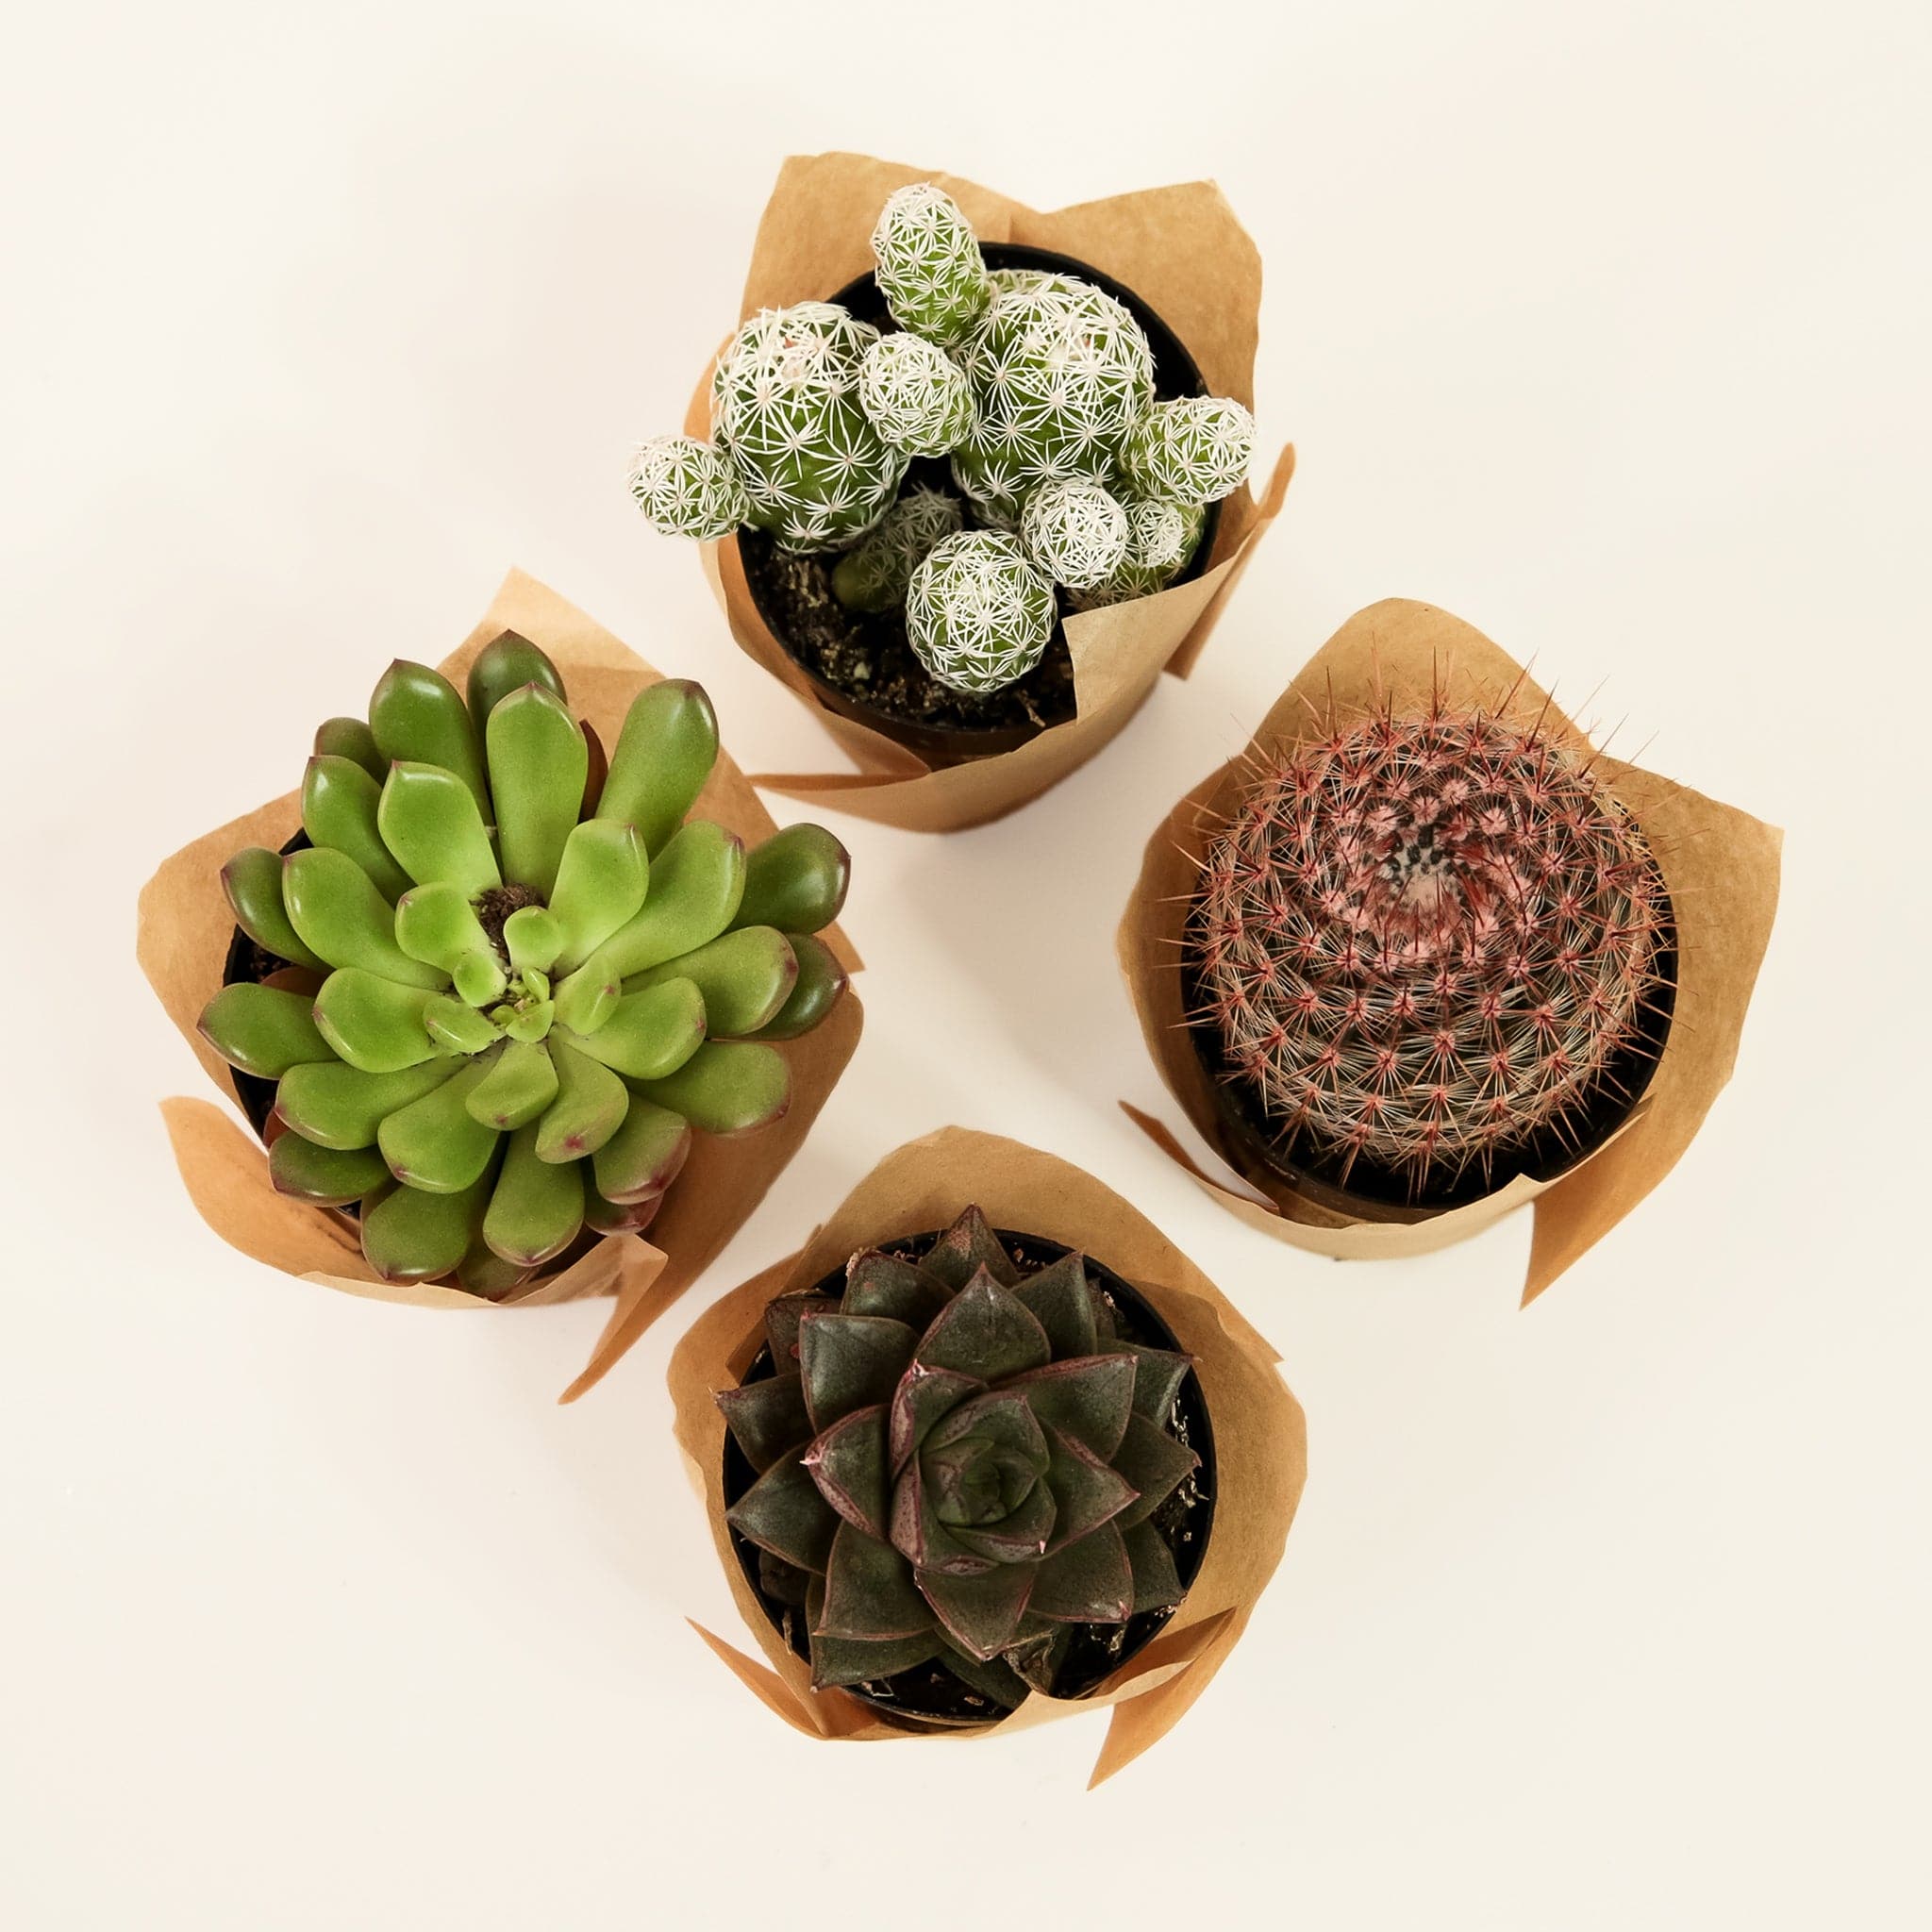 Four individual, 2 inch succulents of various shapes and sizes picked for the small autumn kit. Each succulent container is wrapped in brown craft paper.